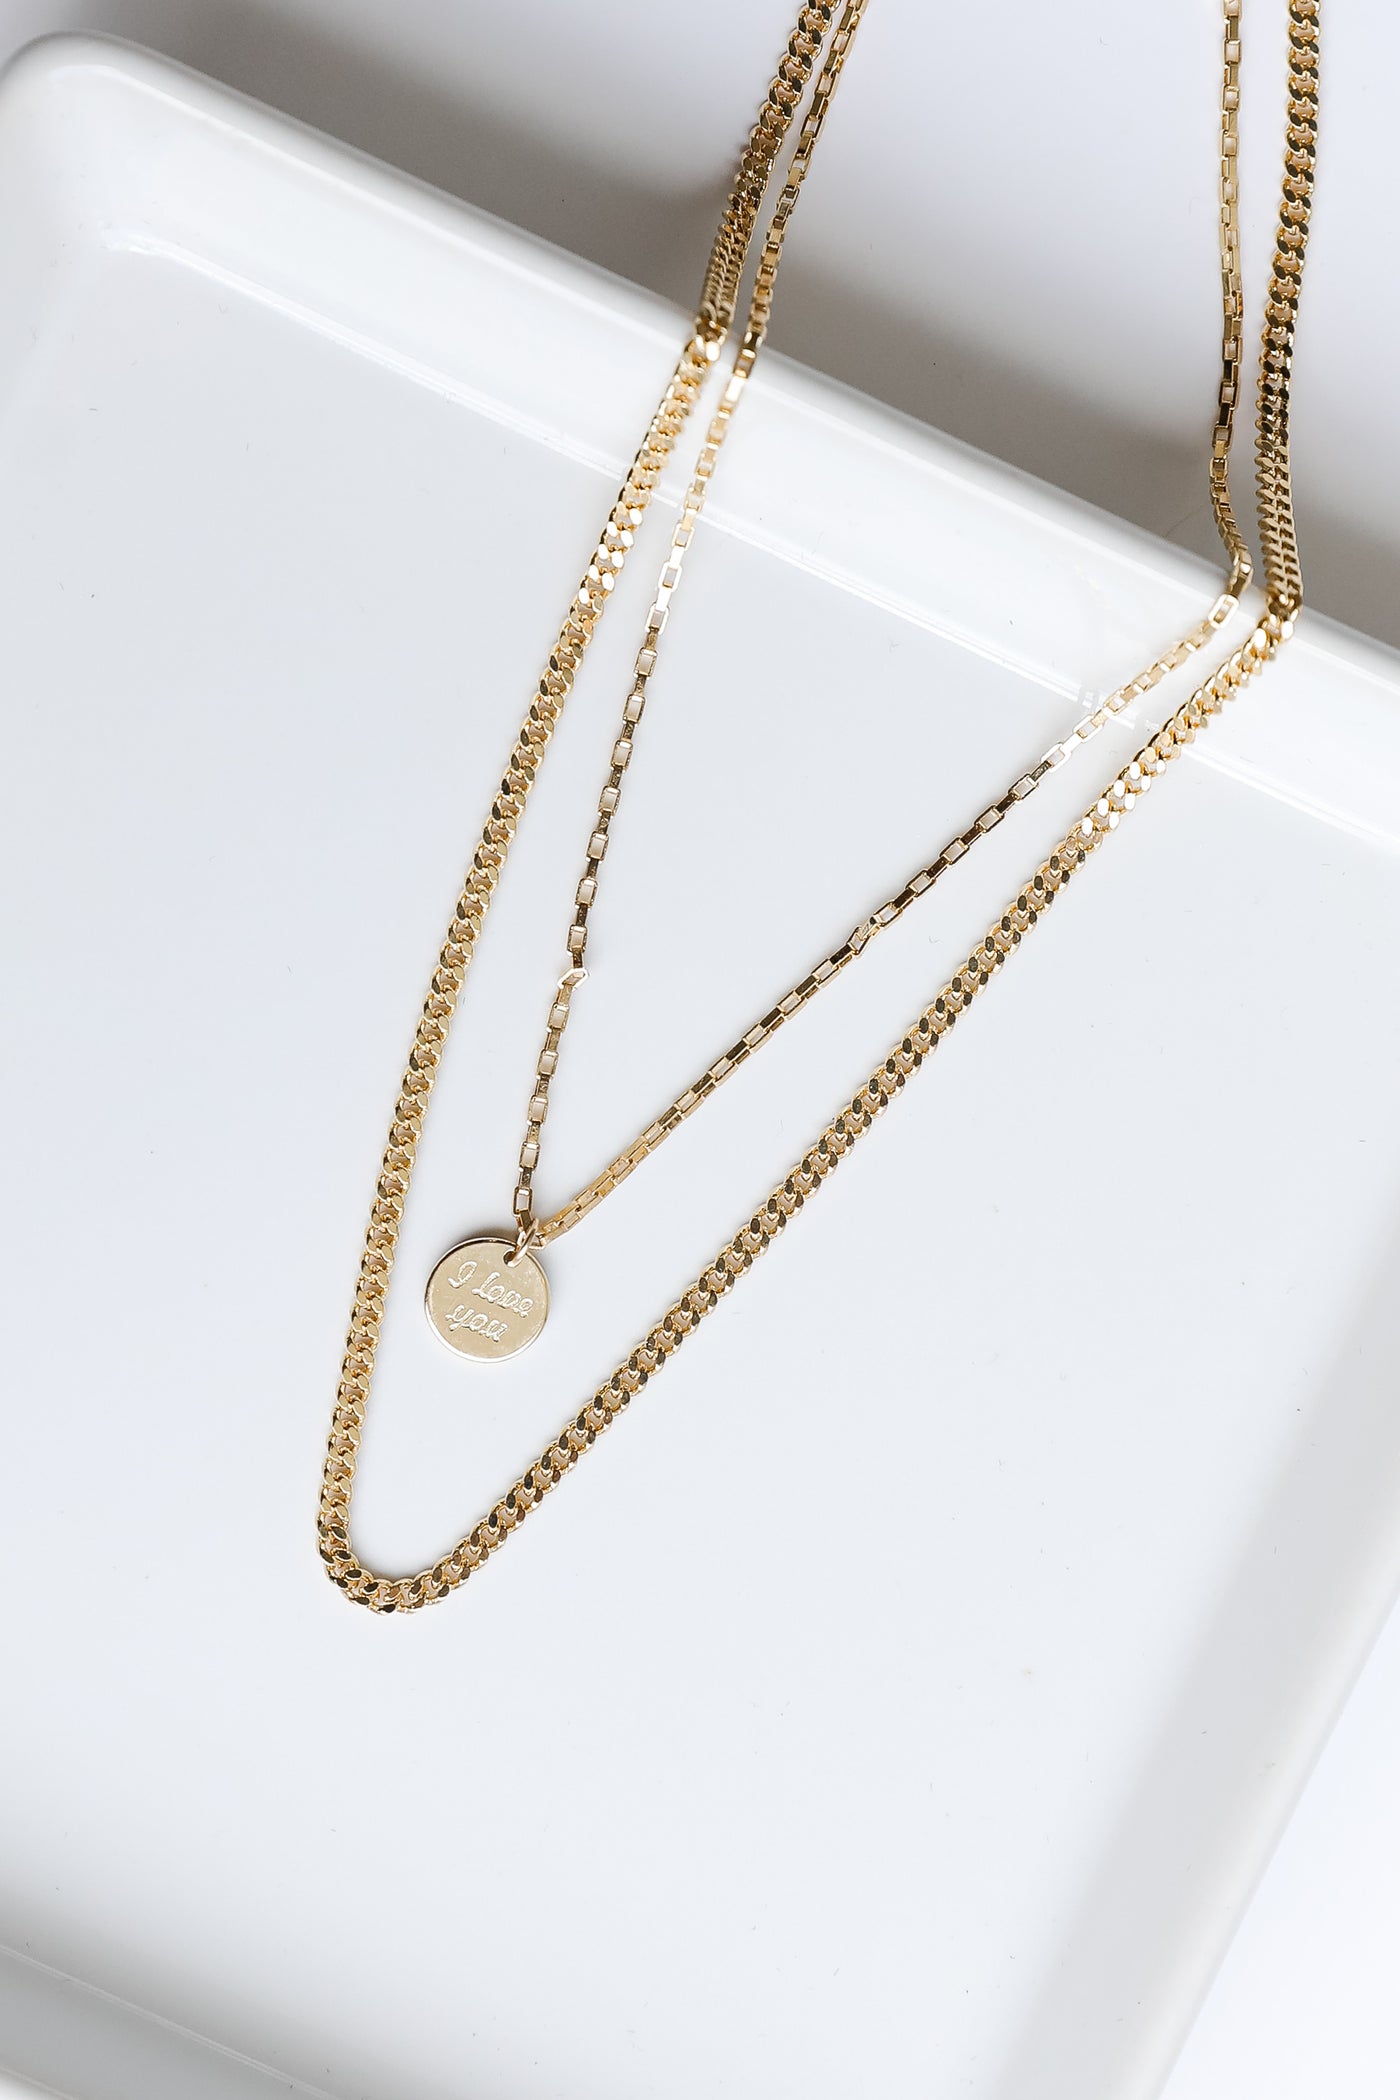 flat lay of a gold necklace